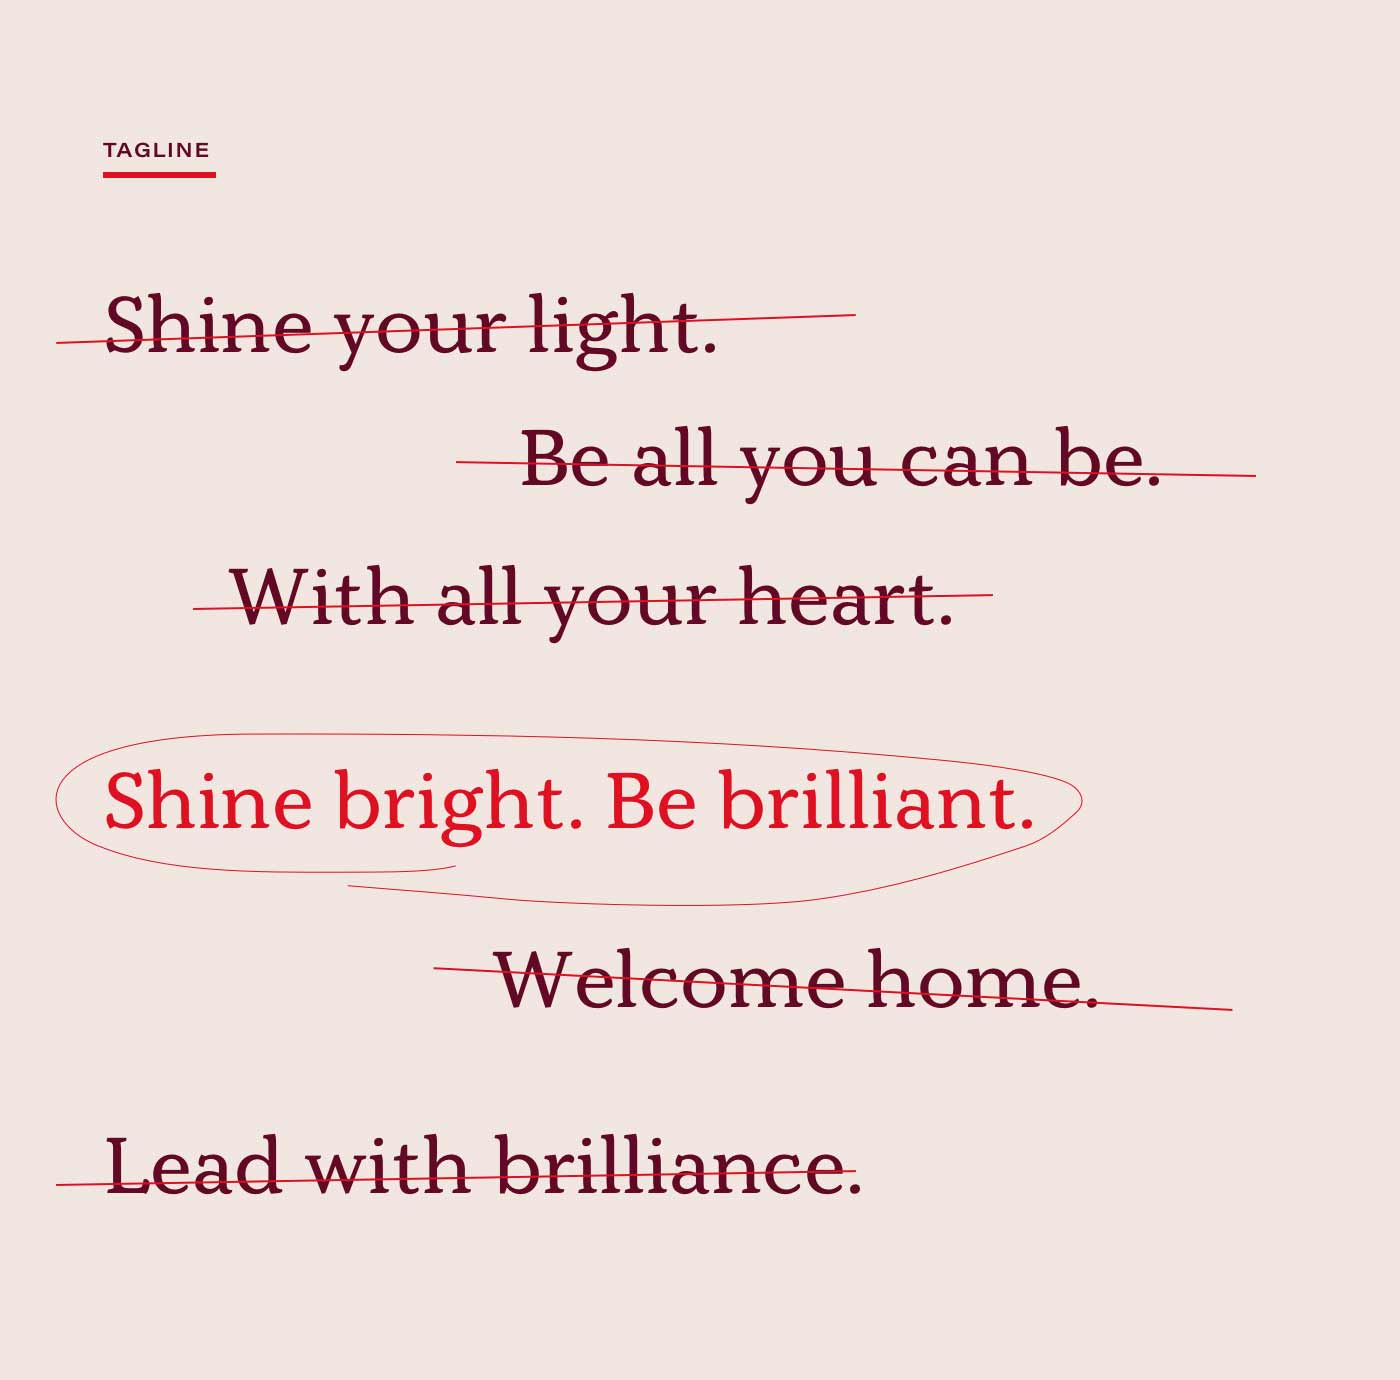 Examples of some of the 50+ tagline options we came up with as part of the updated brand identity, including "With all your heart." and "Lead with brilliance."